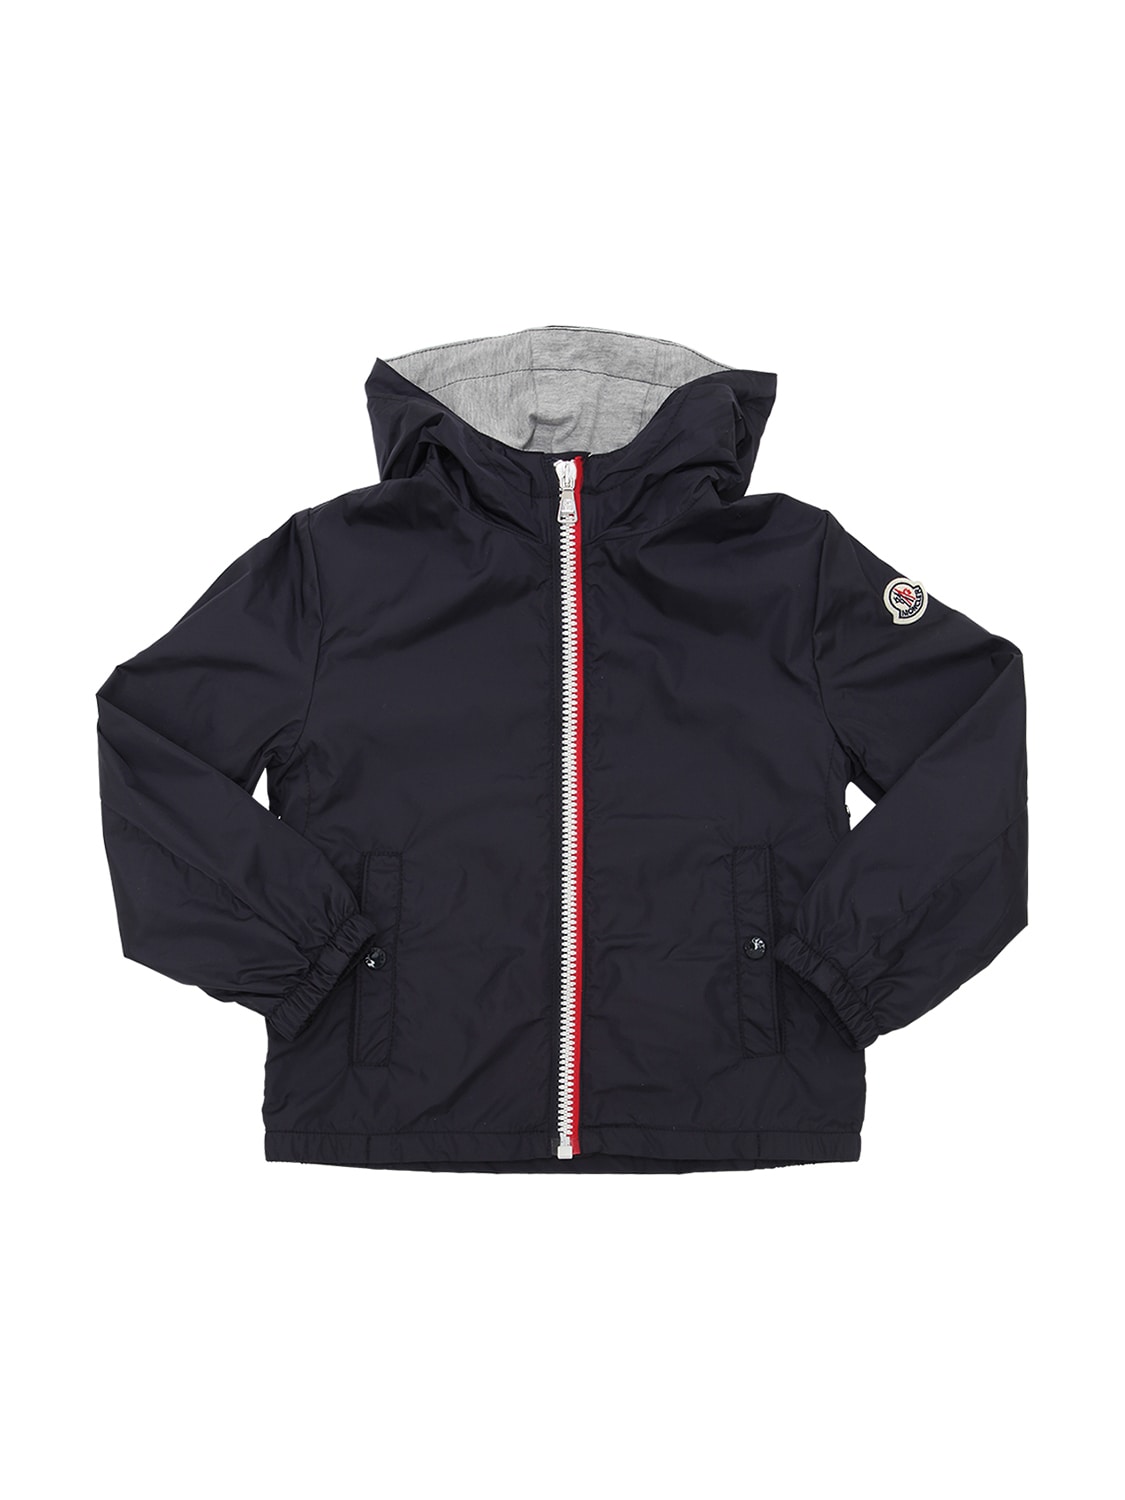 MONCLER NEW URVILLE HOODED NYLON JACKET,71IFGS007-NZQY0